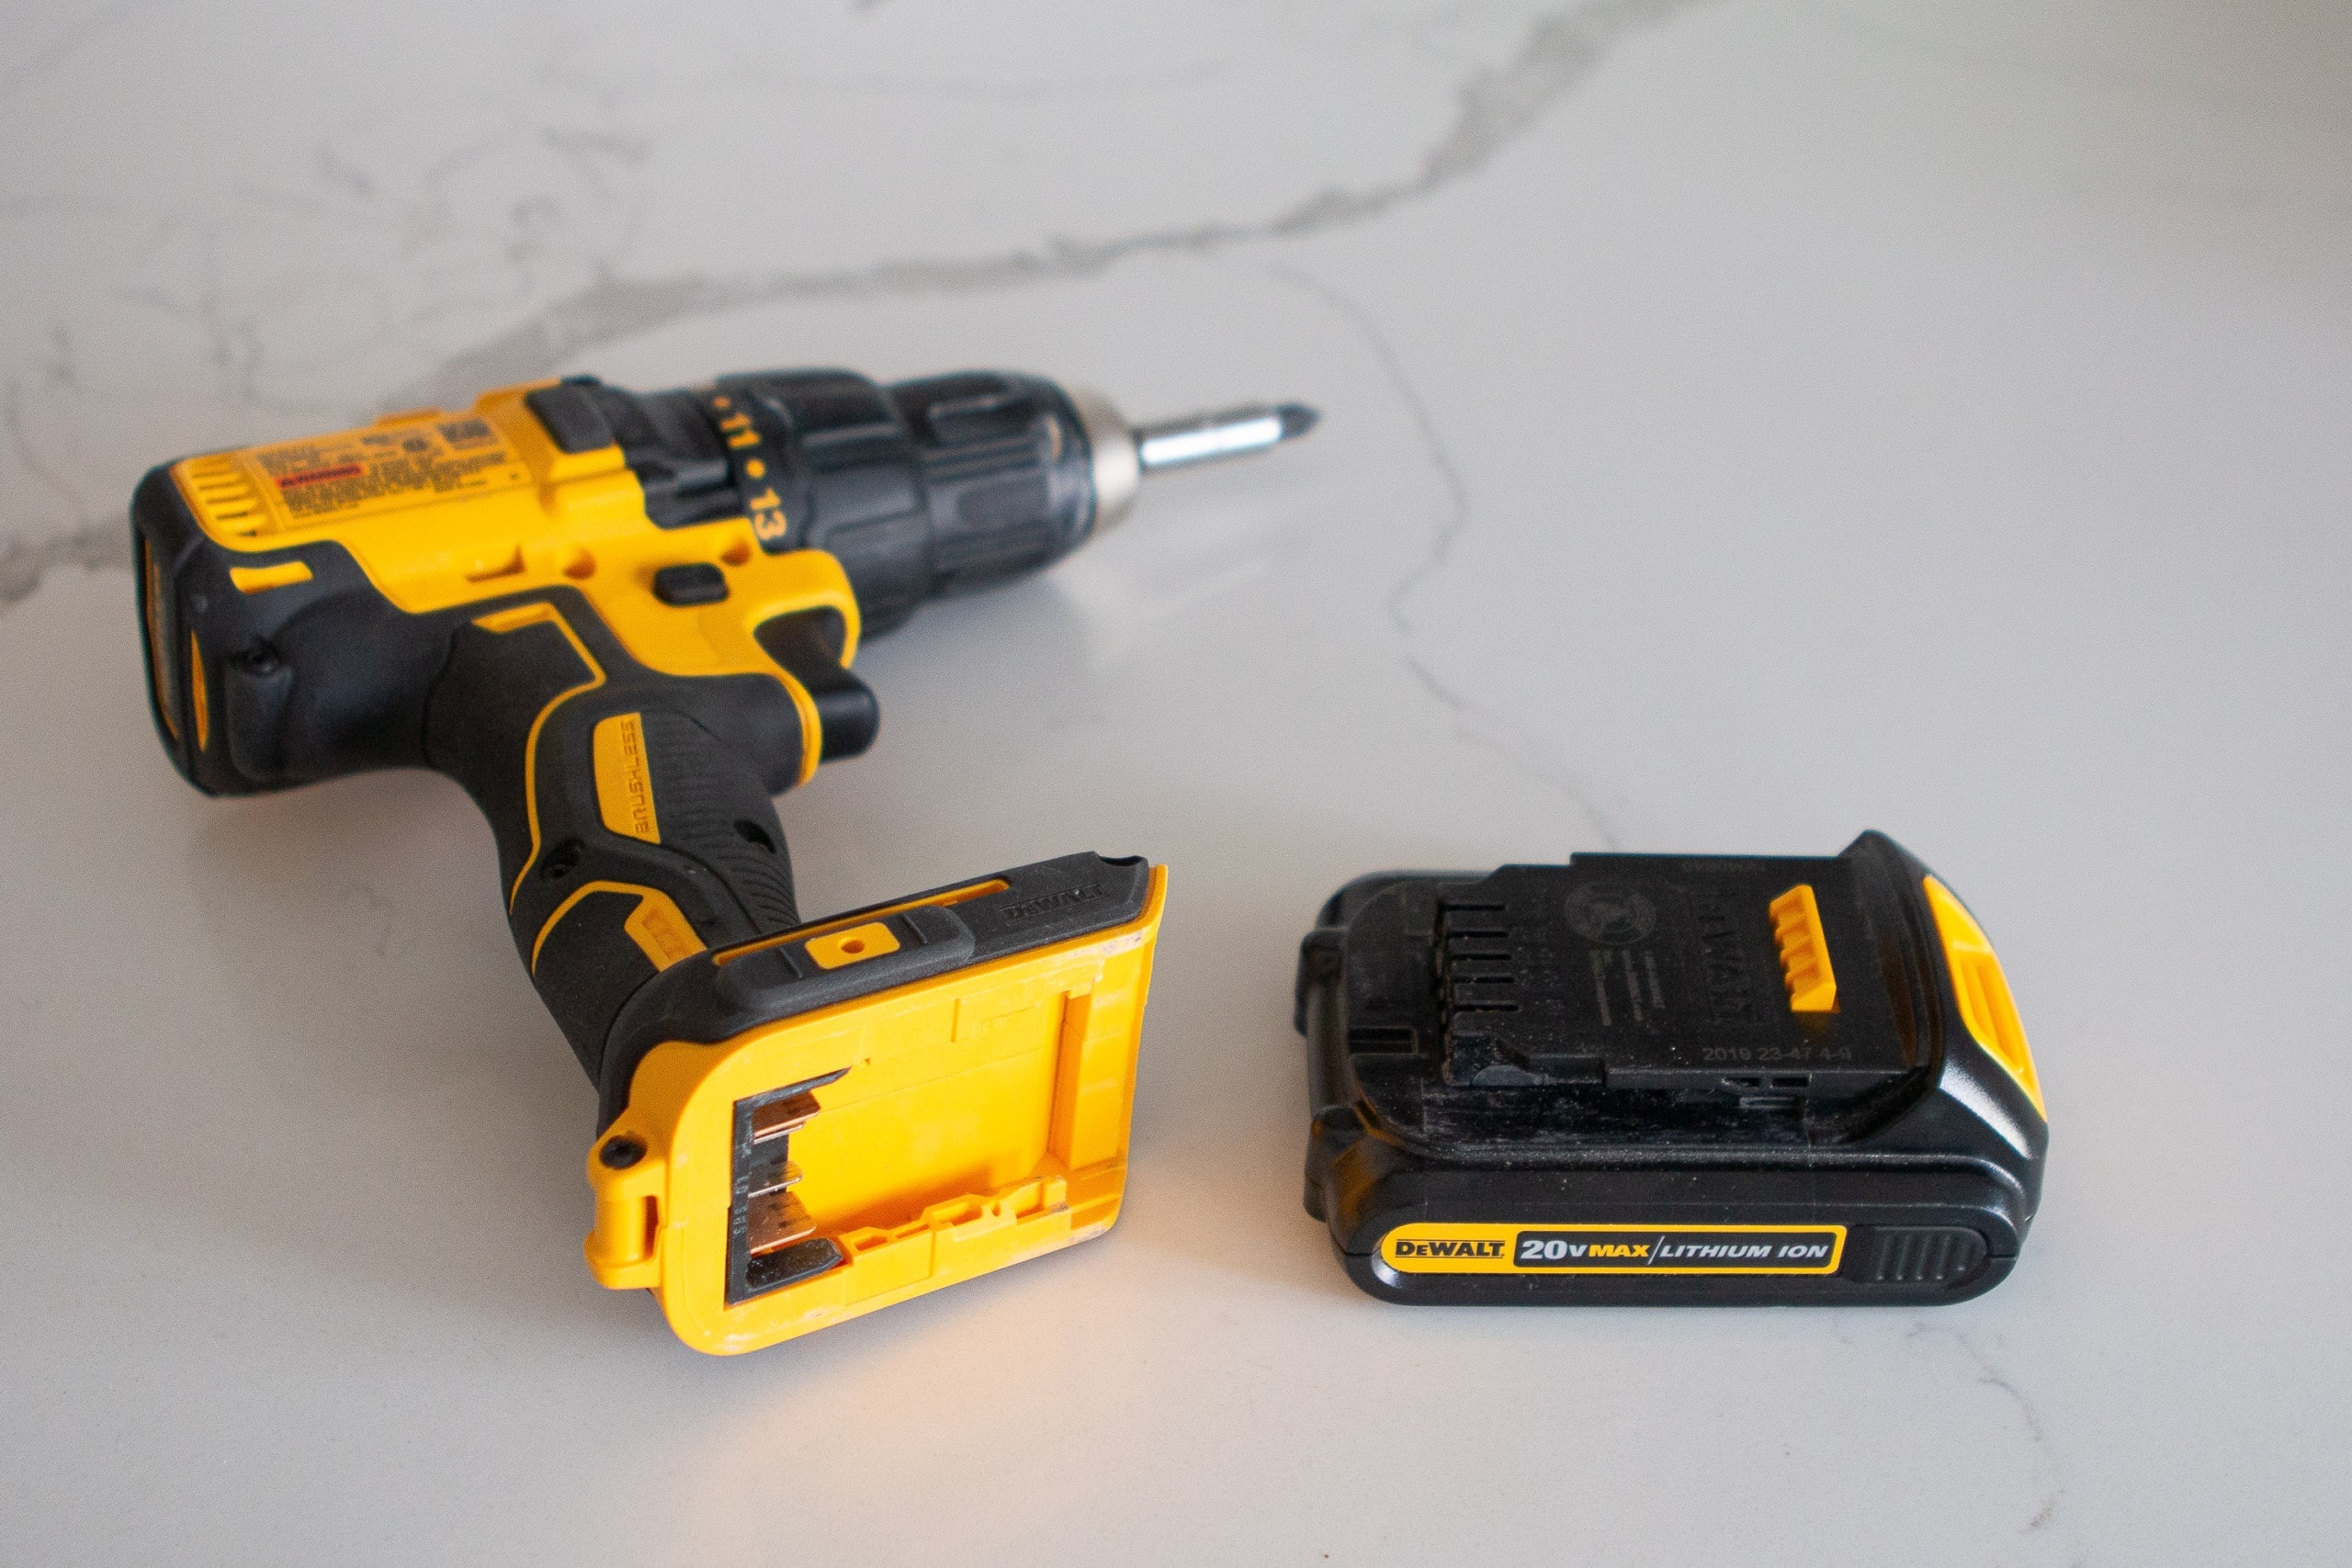 How to charge a power drill